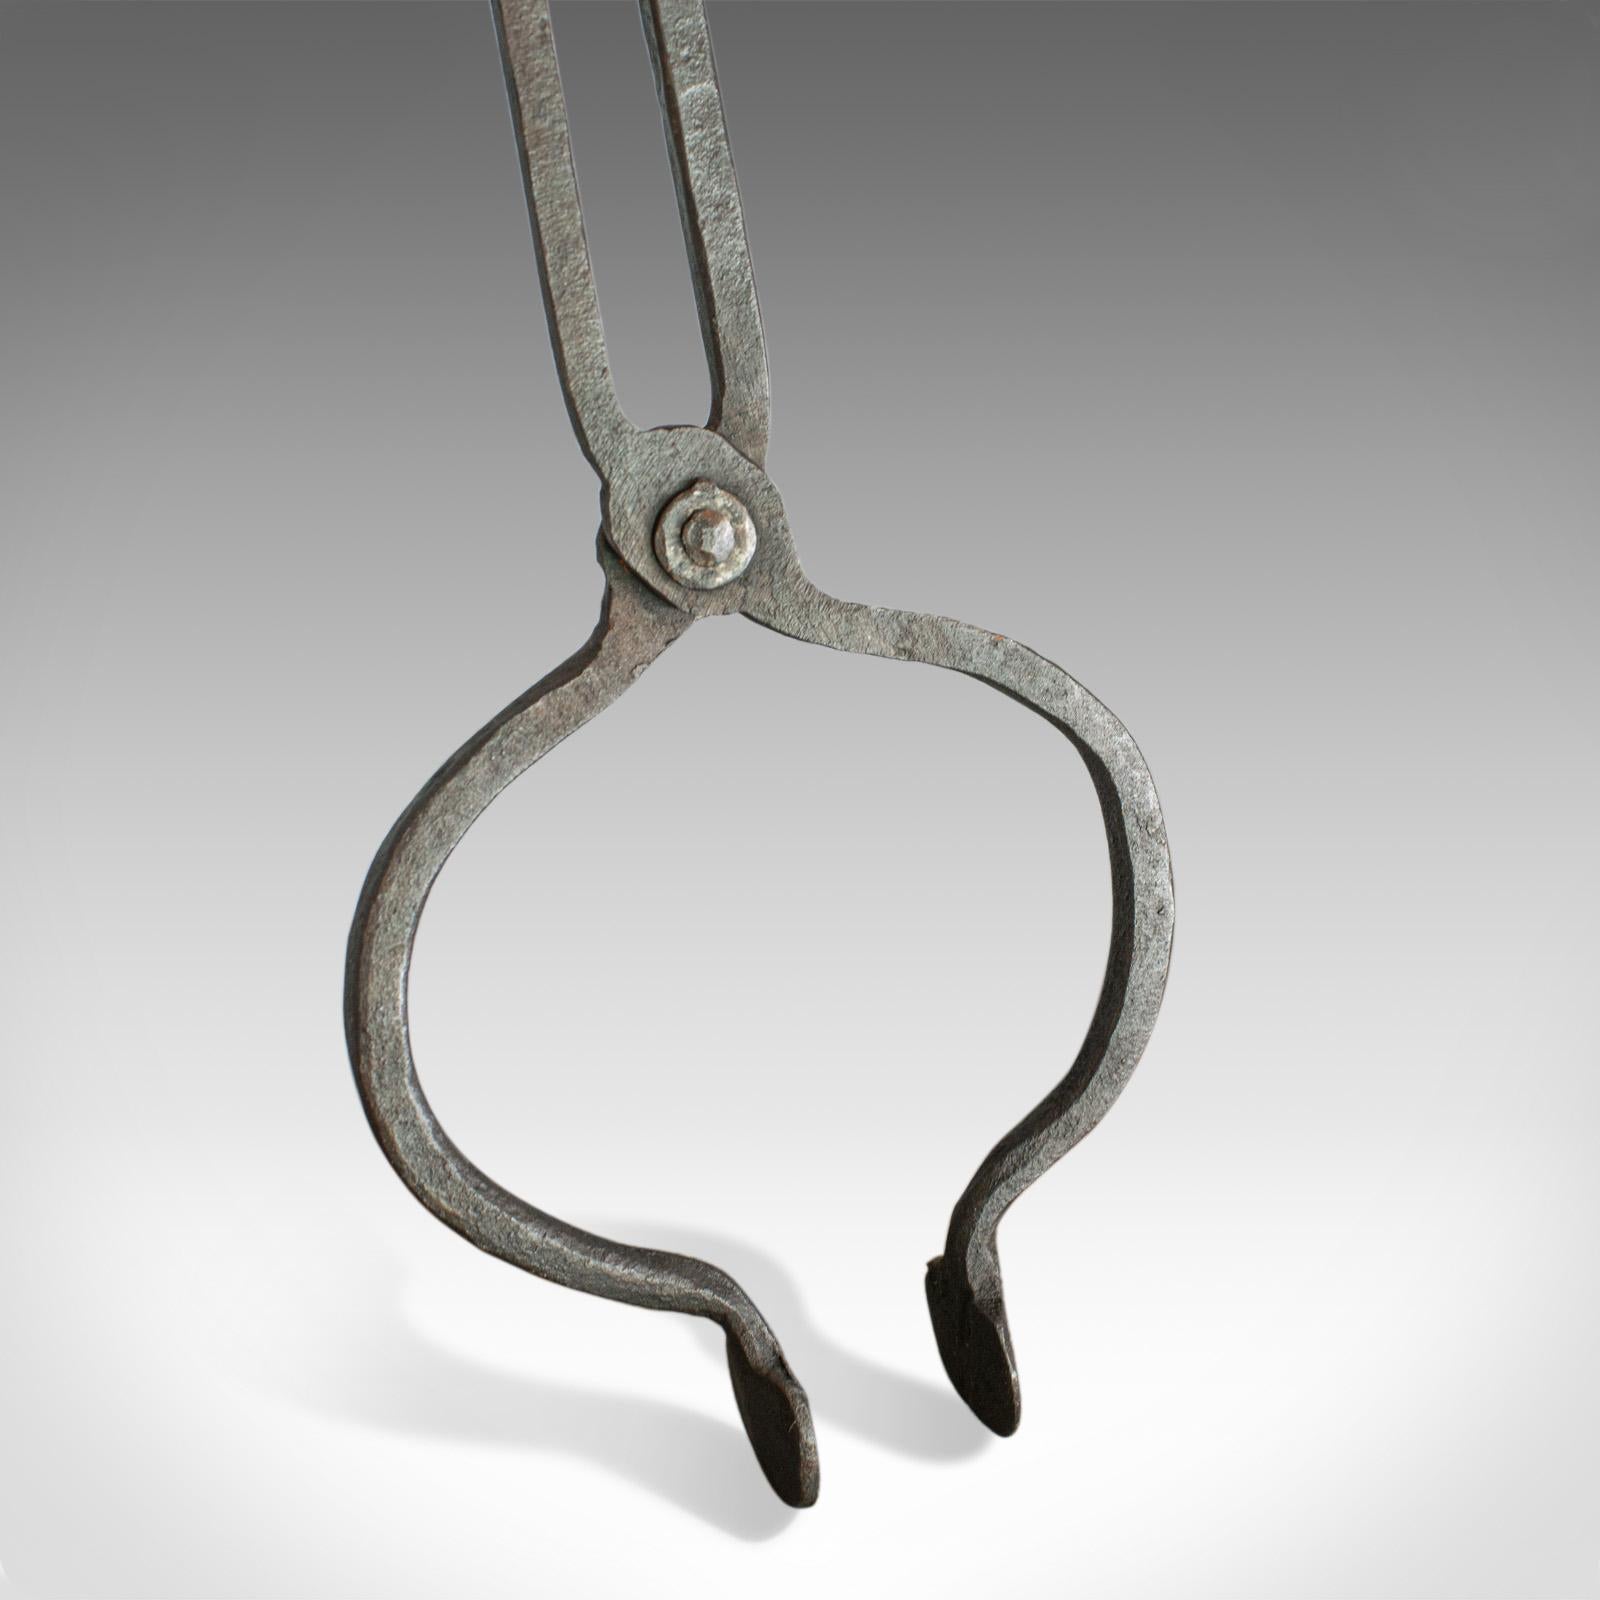 17th Century Antique Pair of Large Fire Tongs, Georgian, Hand Forged, Stirrup, circa 1800